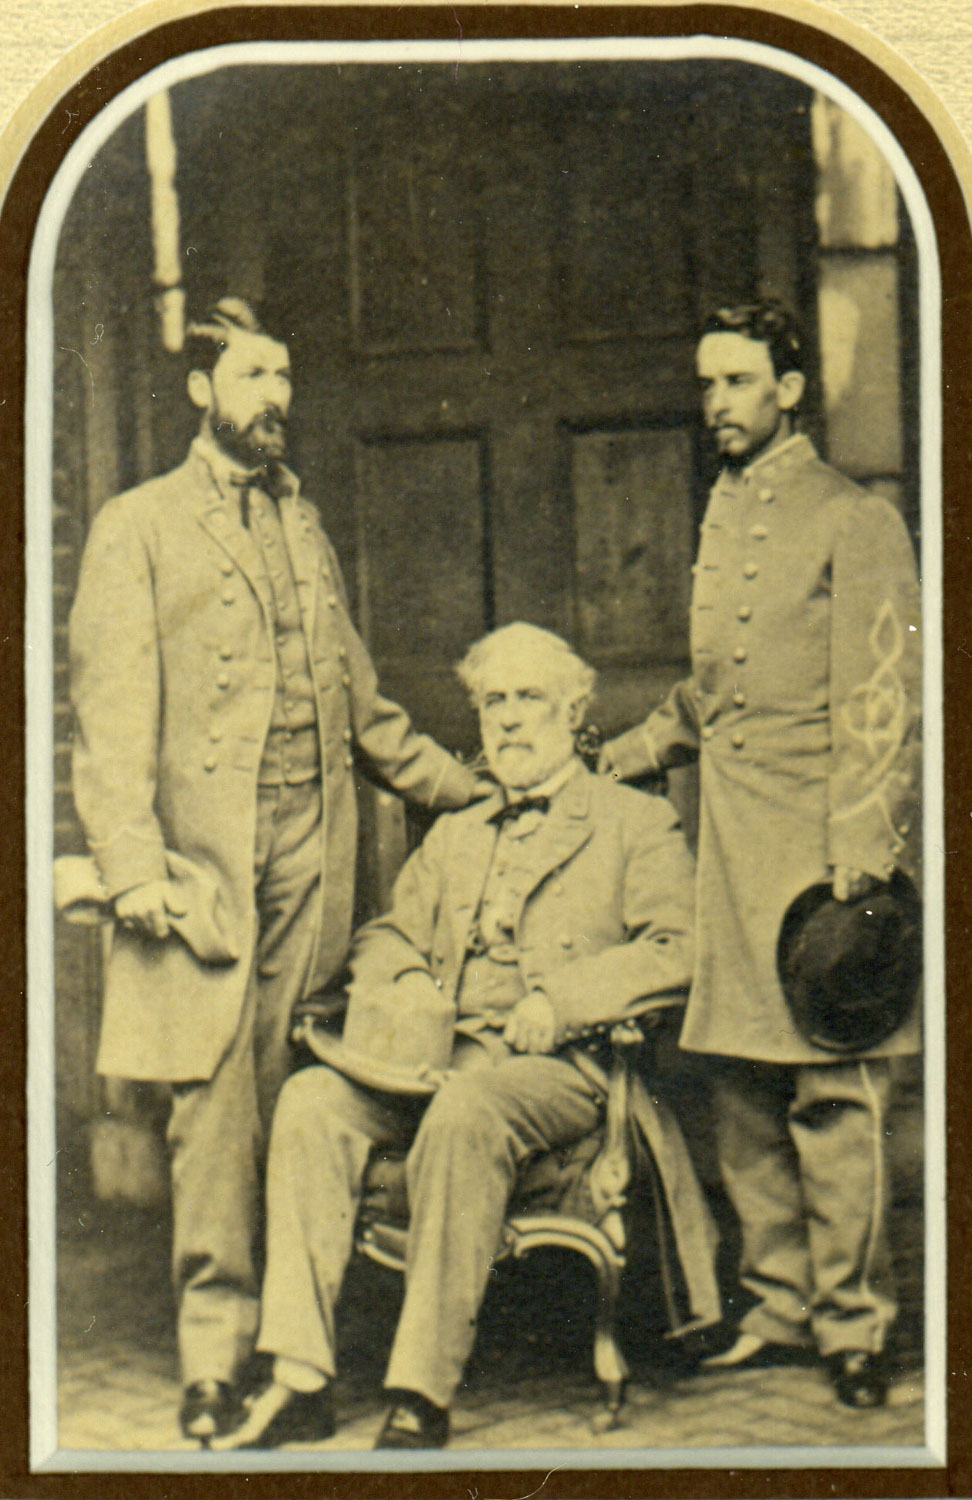 Robert E. Lee, Son and Aide